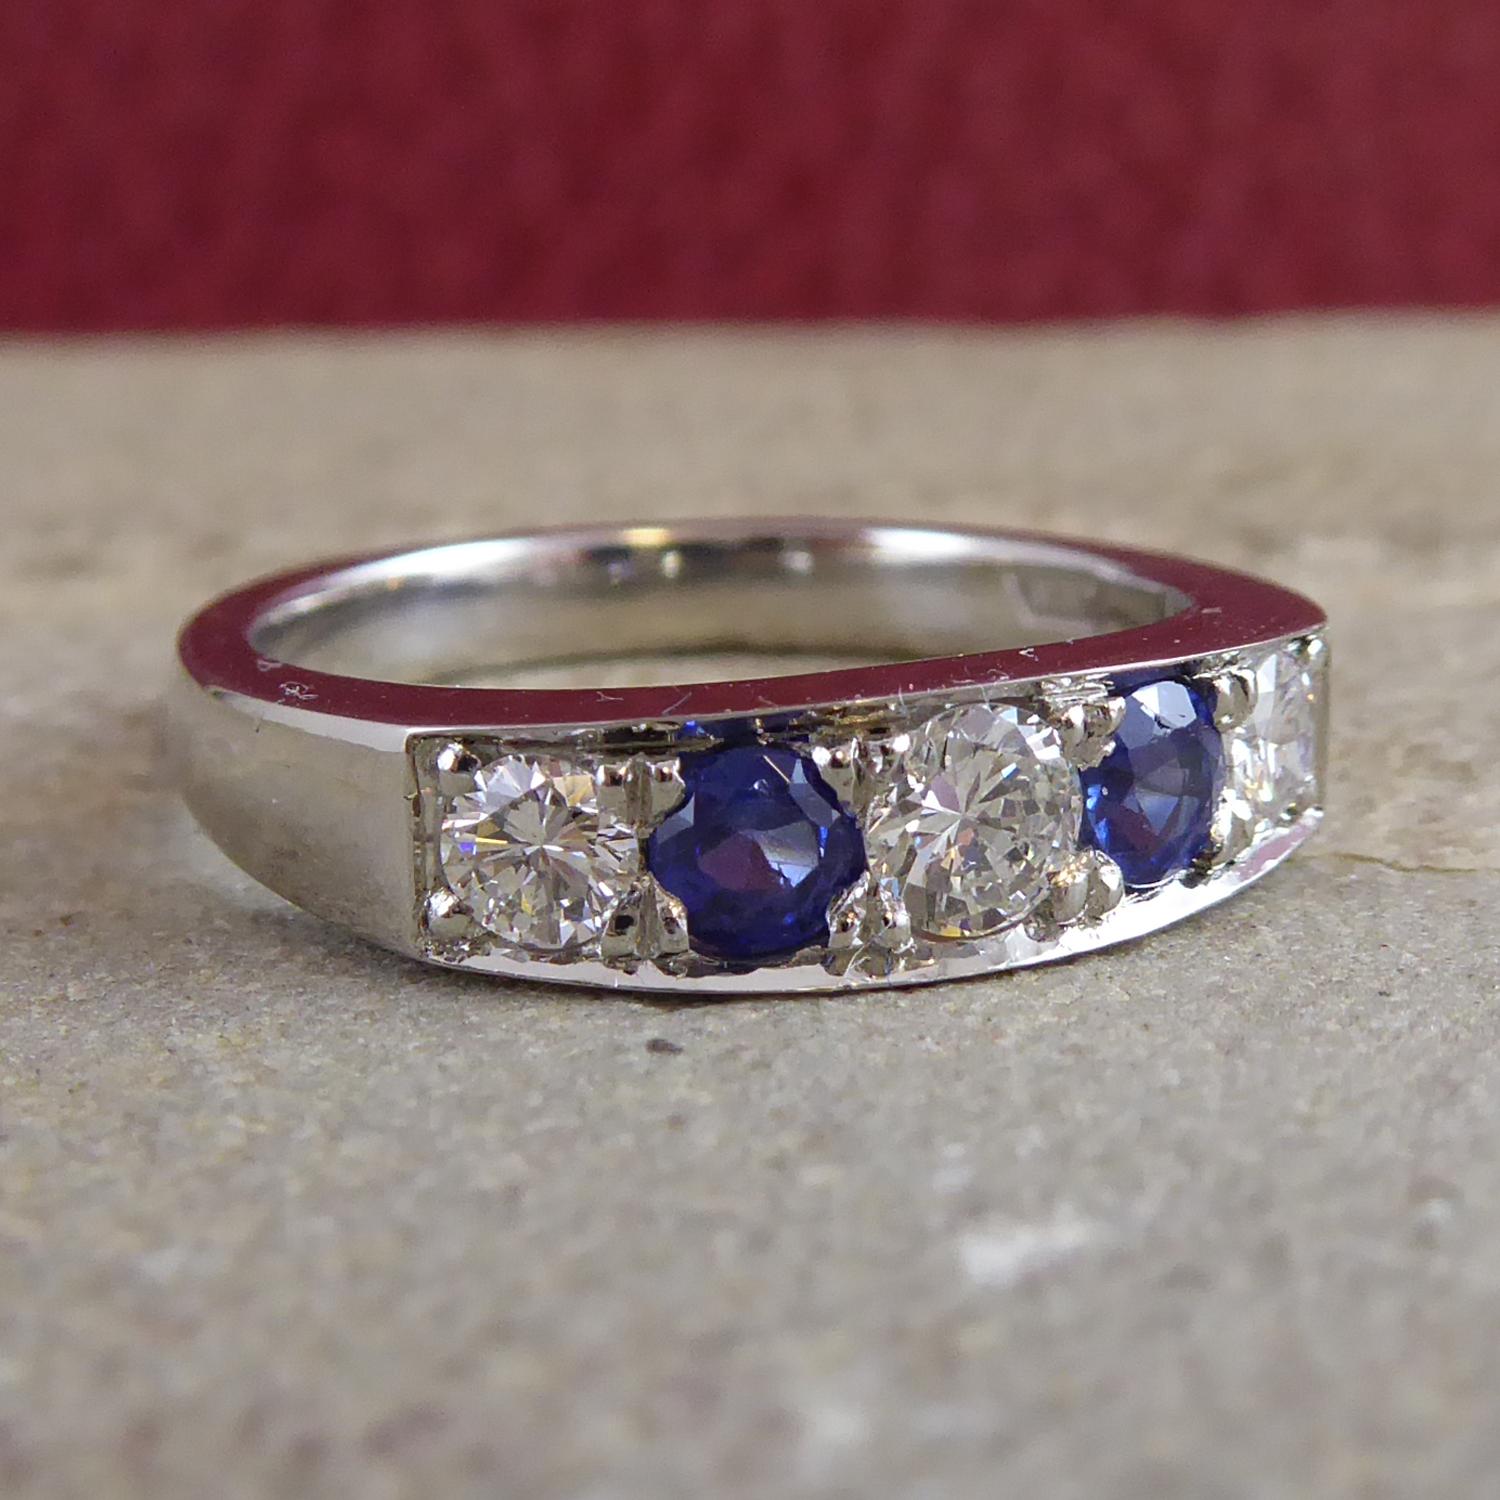 A diamond and sapphire five stone eternity ring set with graduating round brilliant cut diamonds, measuring from approx. 3.70mm to 3.10mm in diameter.  The diamonds alternate with two round, mixed cut sapphires, each measuring approx. 3.30mm and